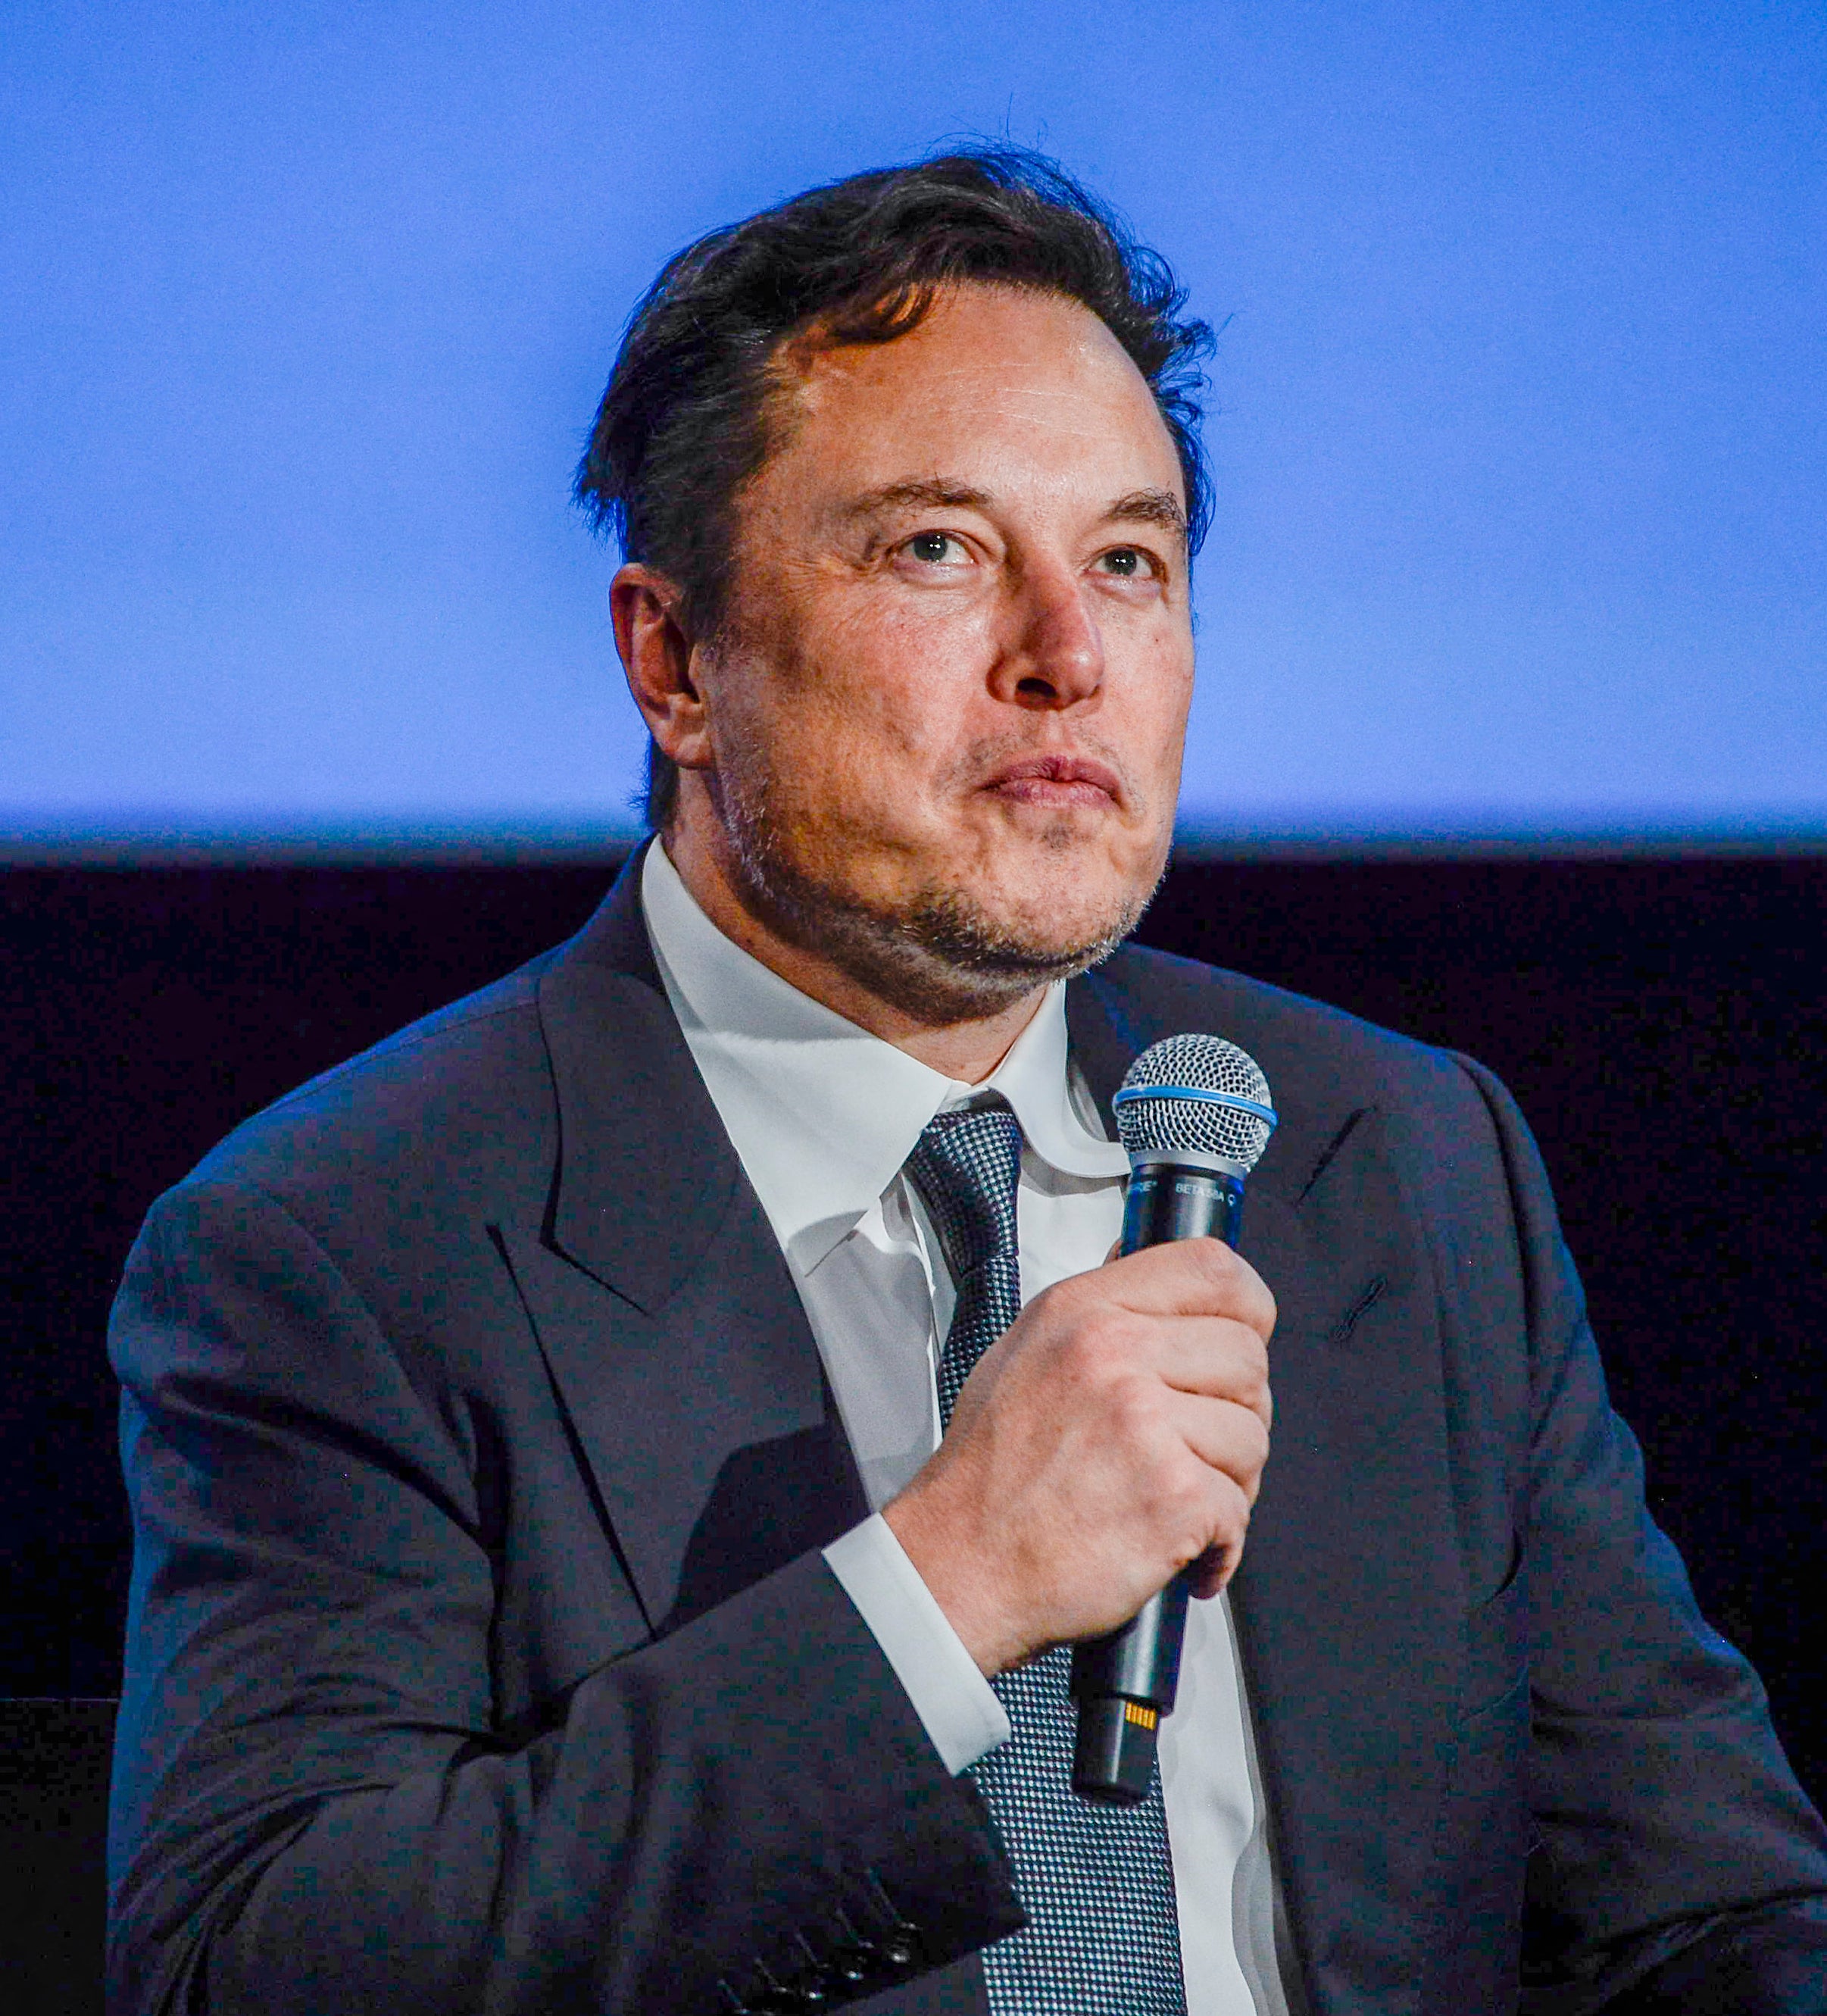 Close-up of Elon in a suit and holding a microphone